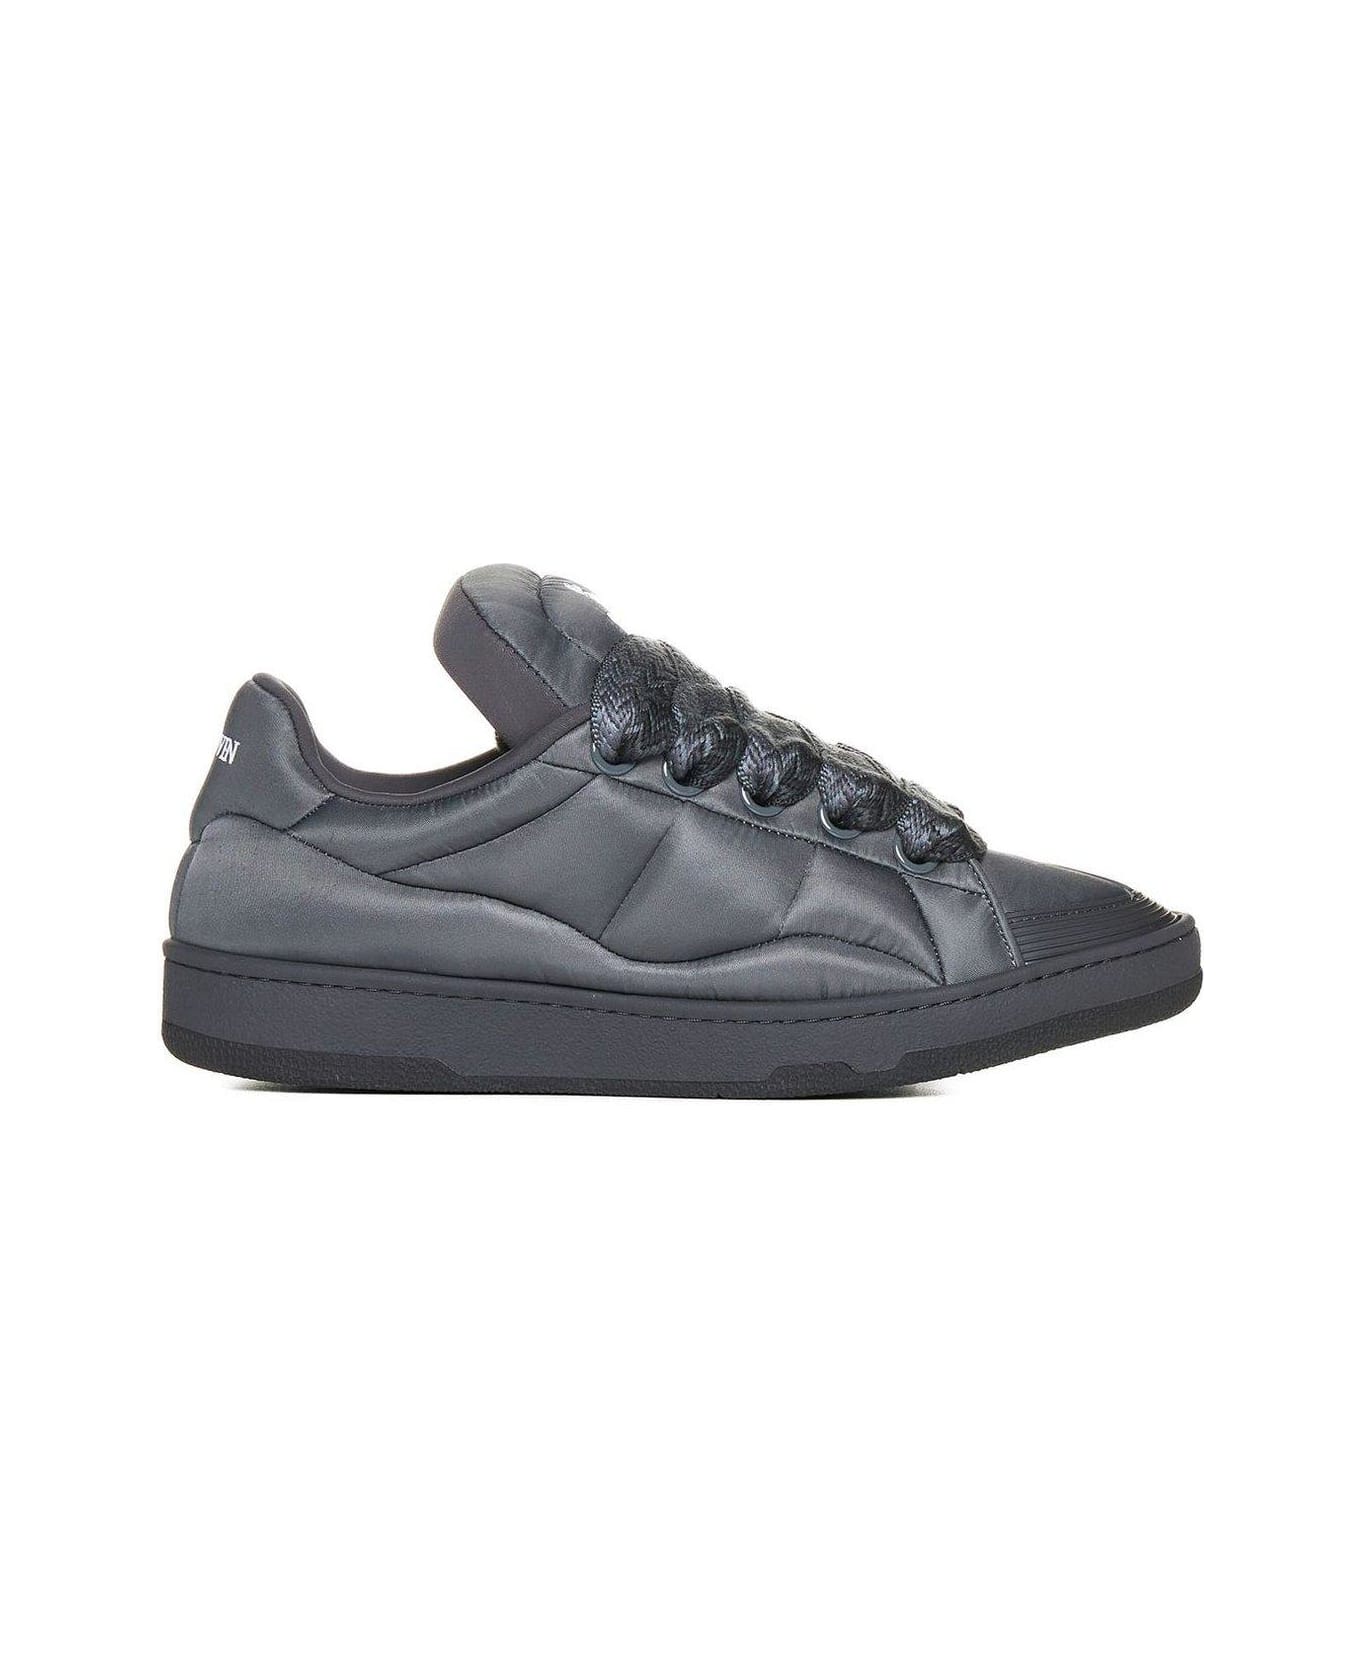 Lanvin Round Toe Lace-up Sneakers - Loden スニーカー